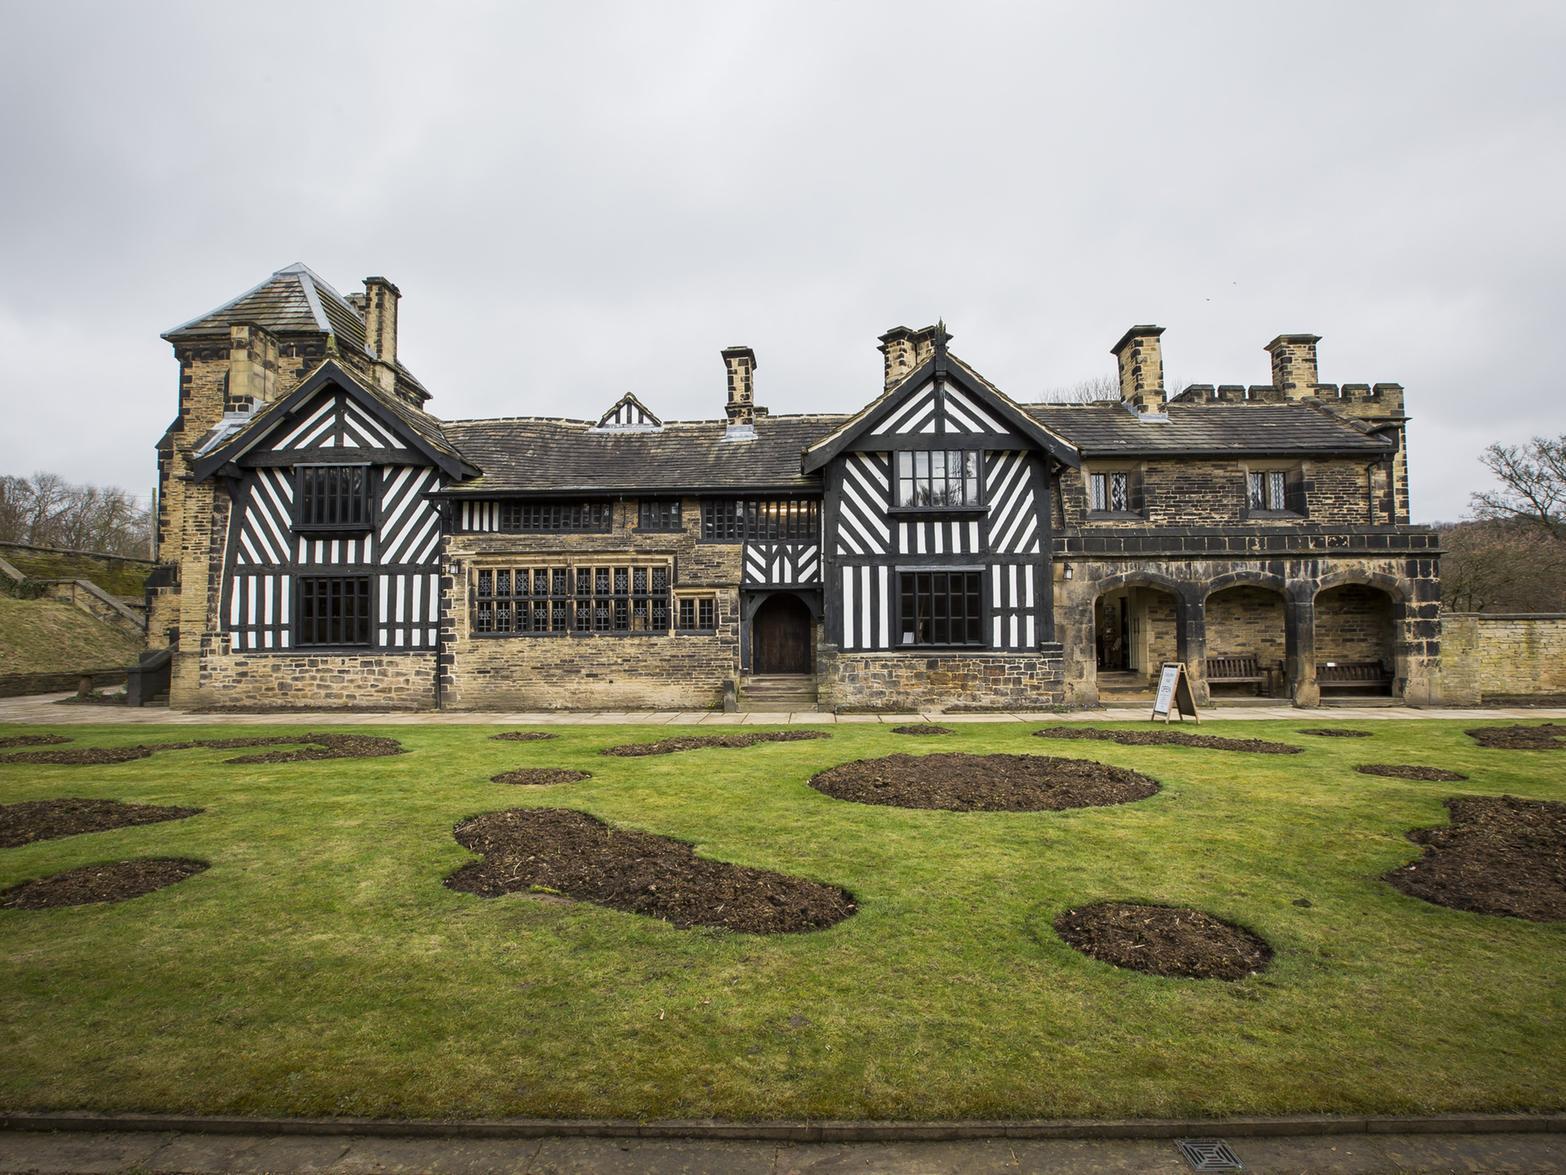 Shibden Hall has seen a significant increase in numbers since the airing of BBC drama Gentleman Jack, making it a must visit location. See where the 19th century landowner Anne Lister once lived and take in the halls history.